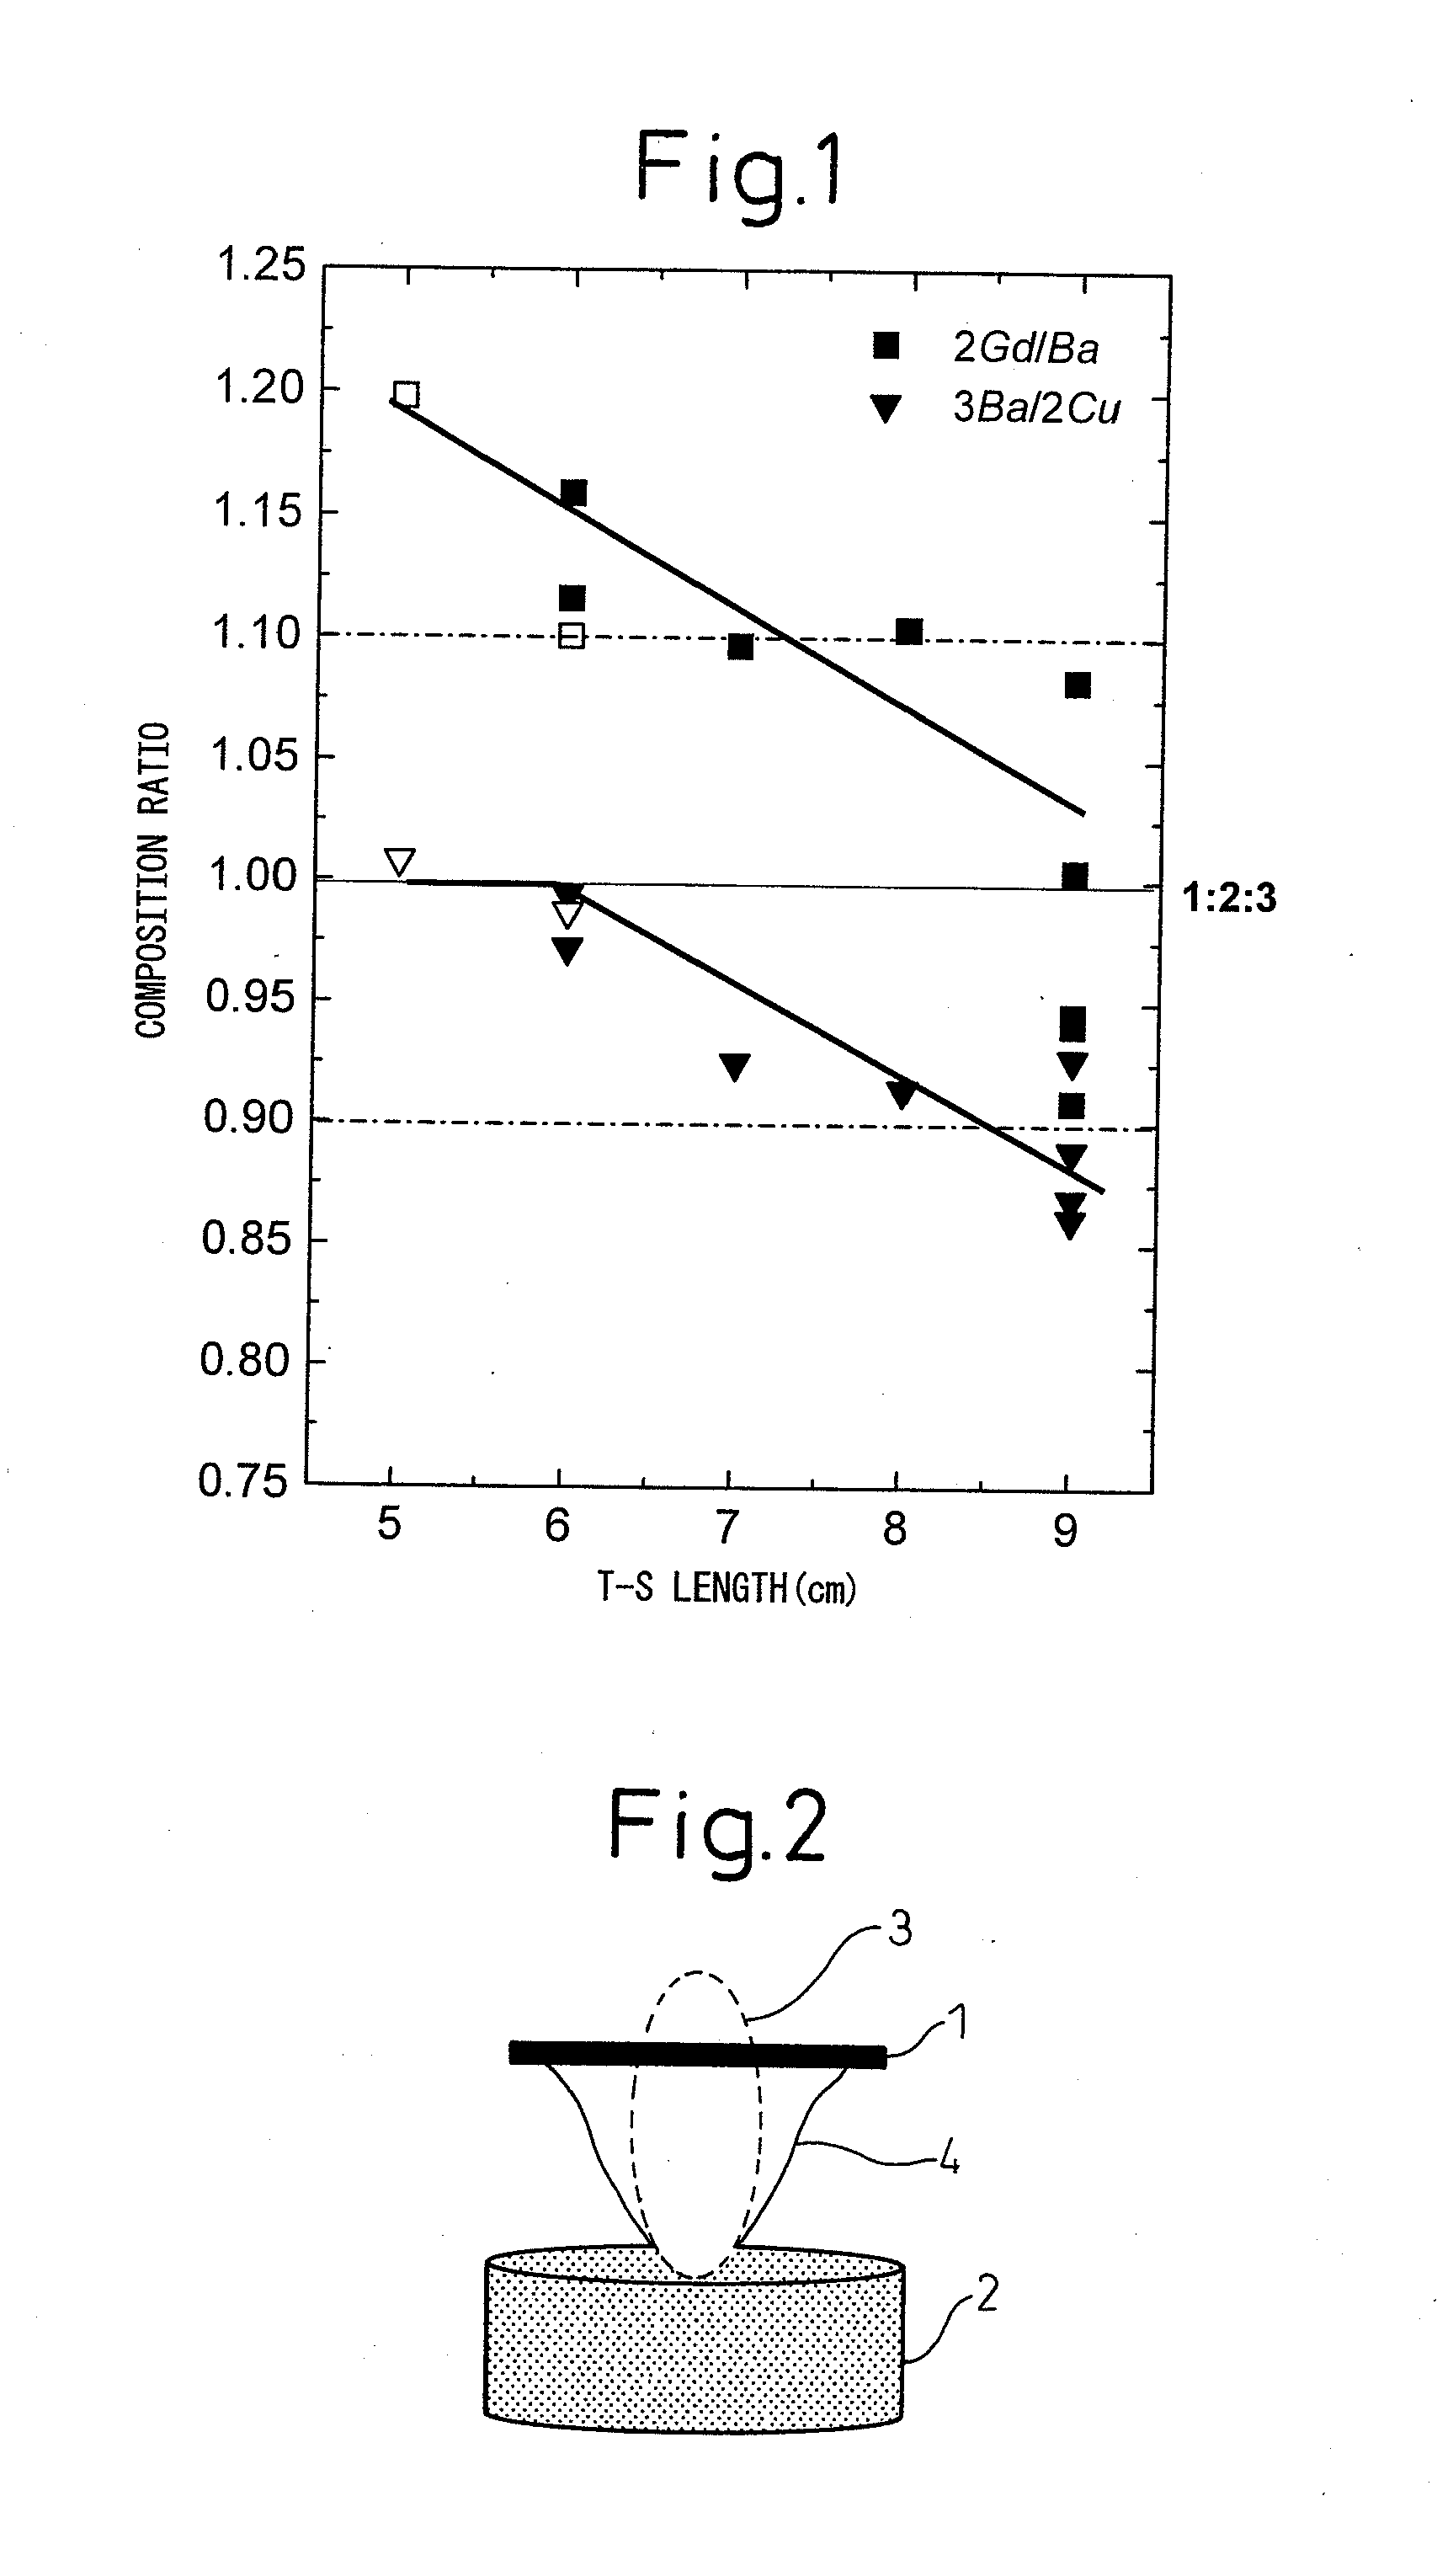 Re123-based oxide superconductor and method of production of same